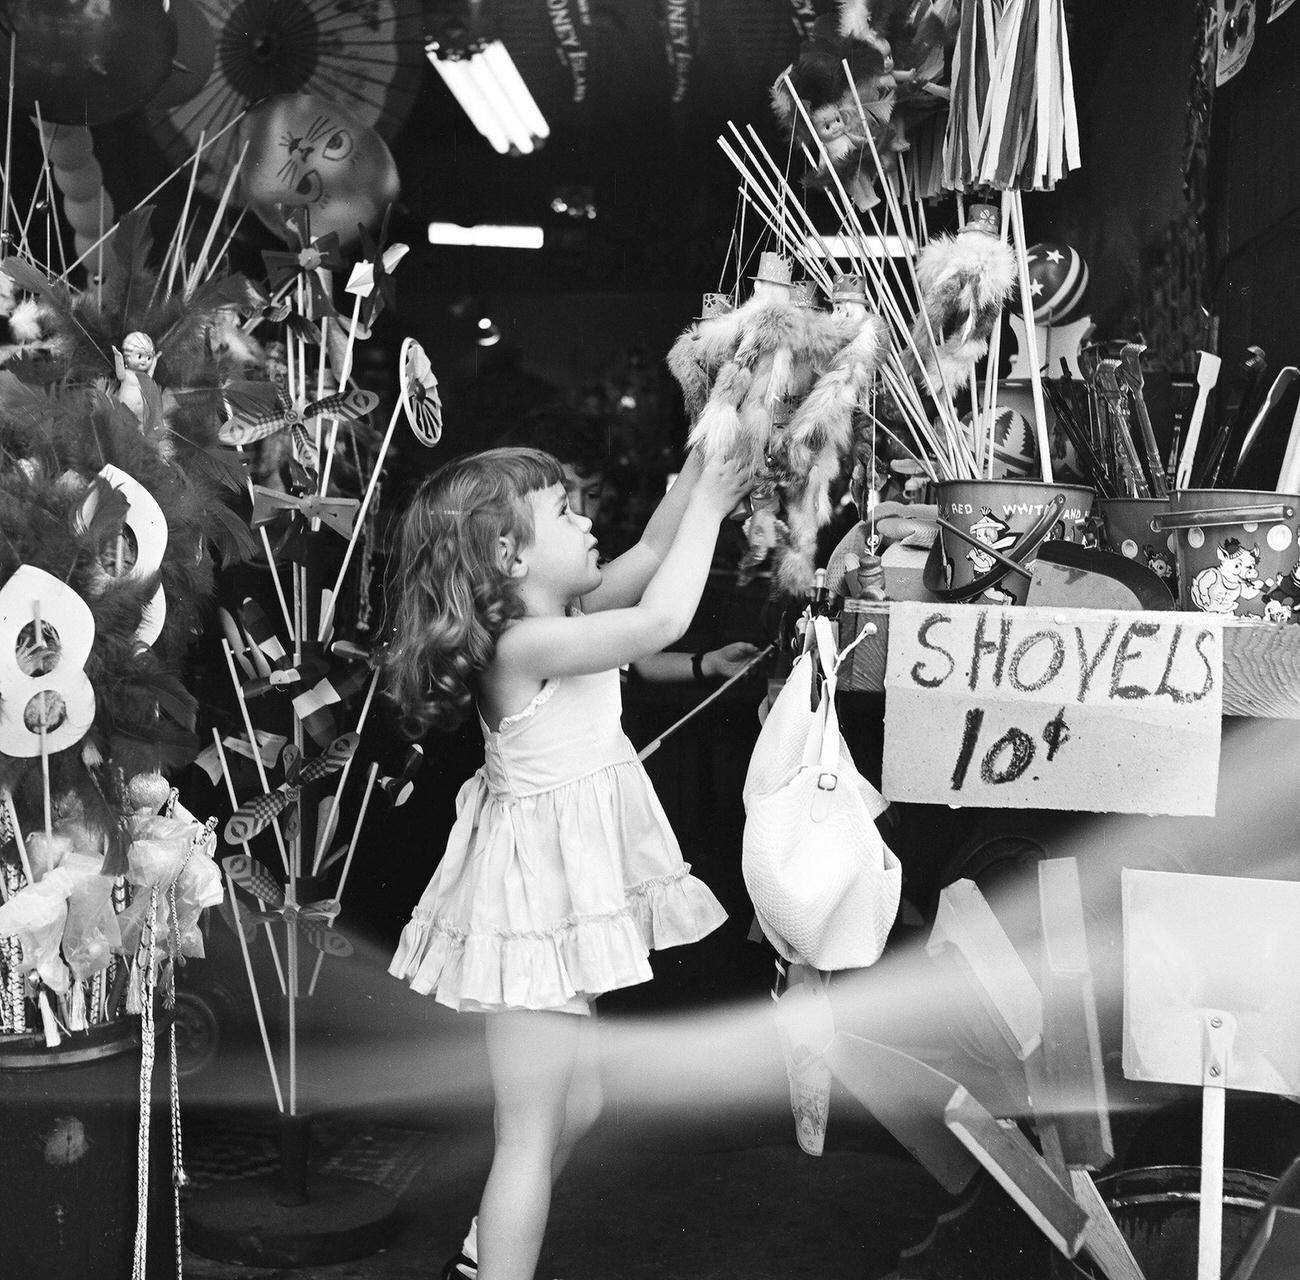 Girl Choosing A Toy From A Storefront Vendor, 1948